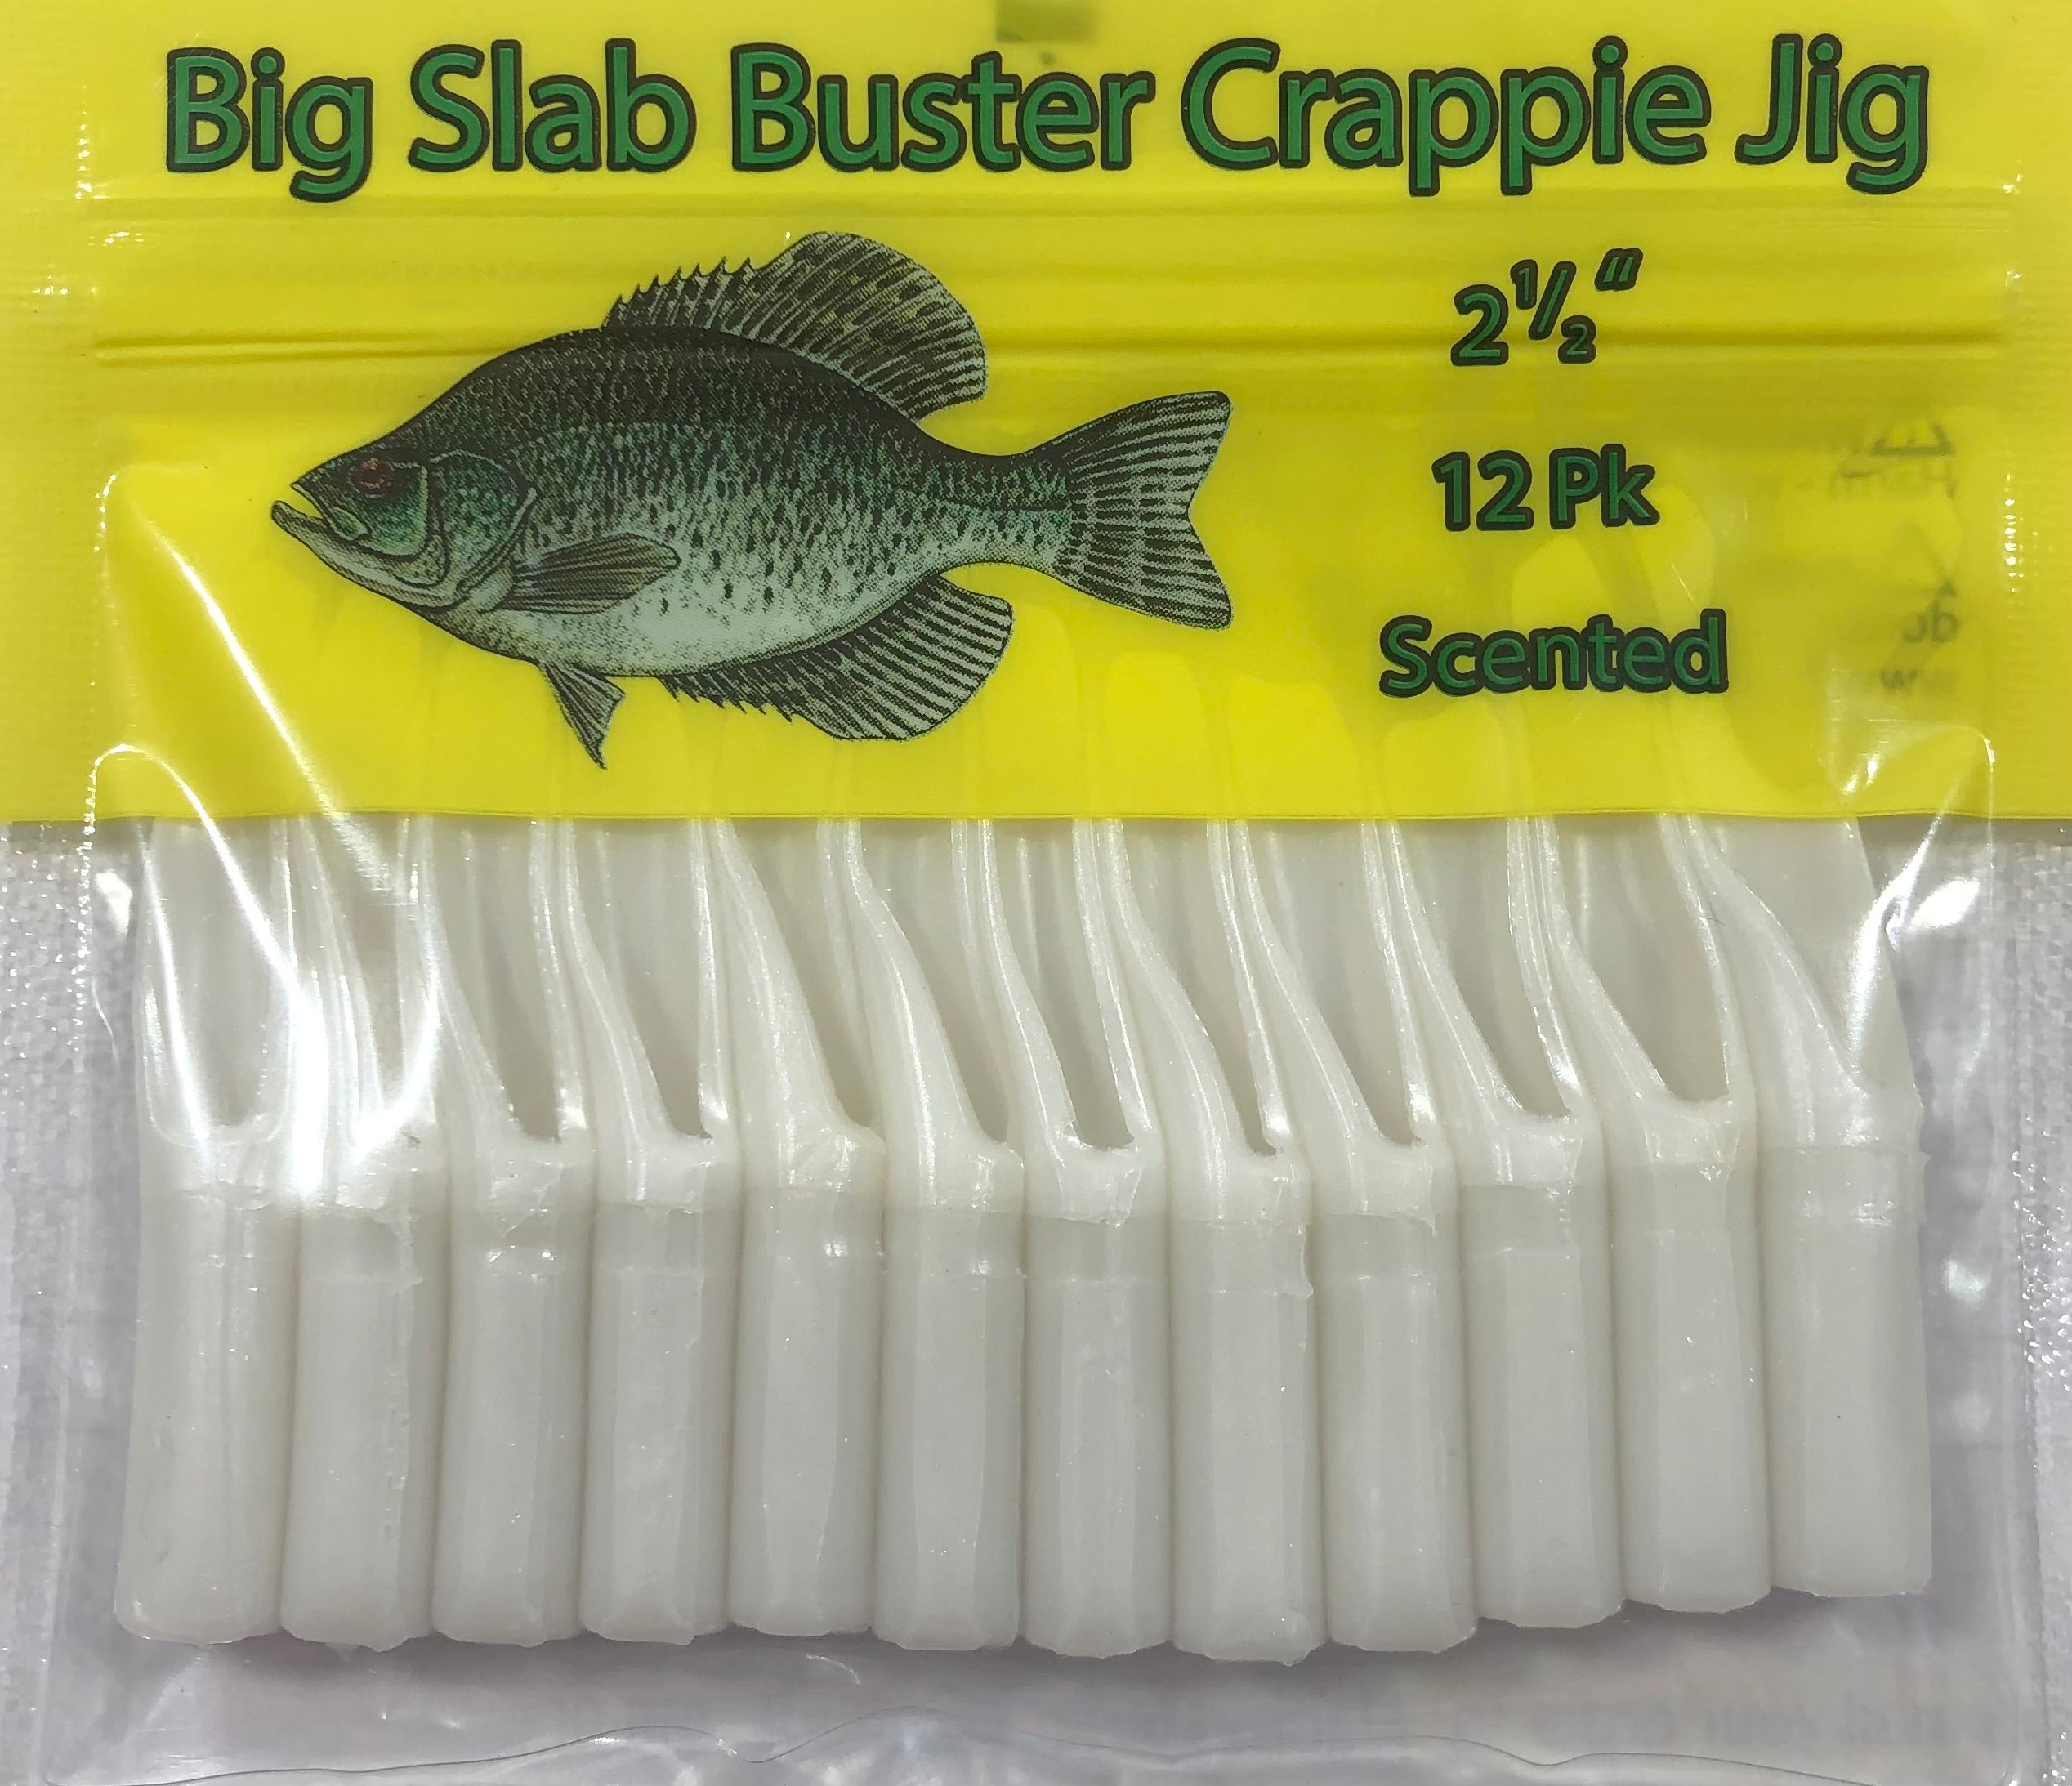 Literally a Crappie Jig - Page 2